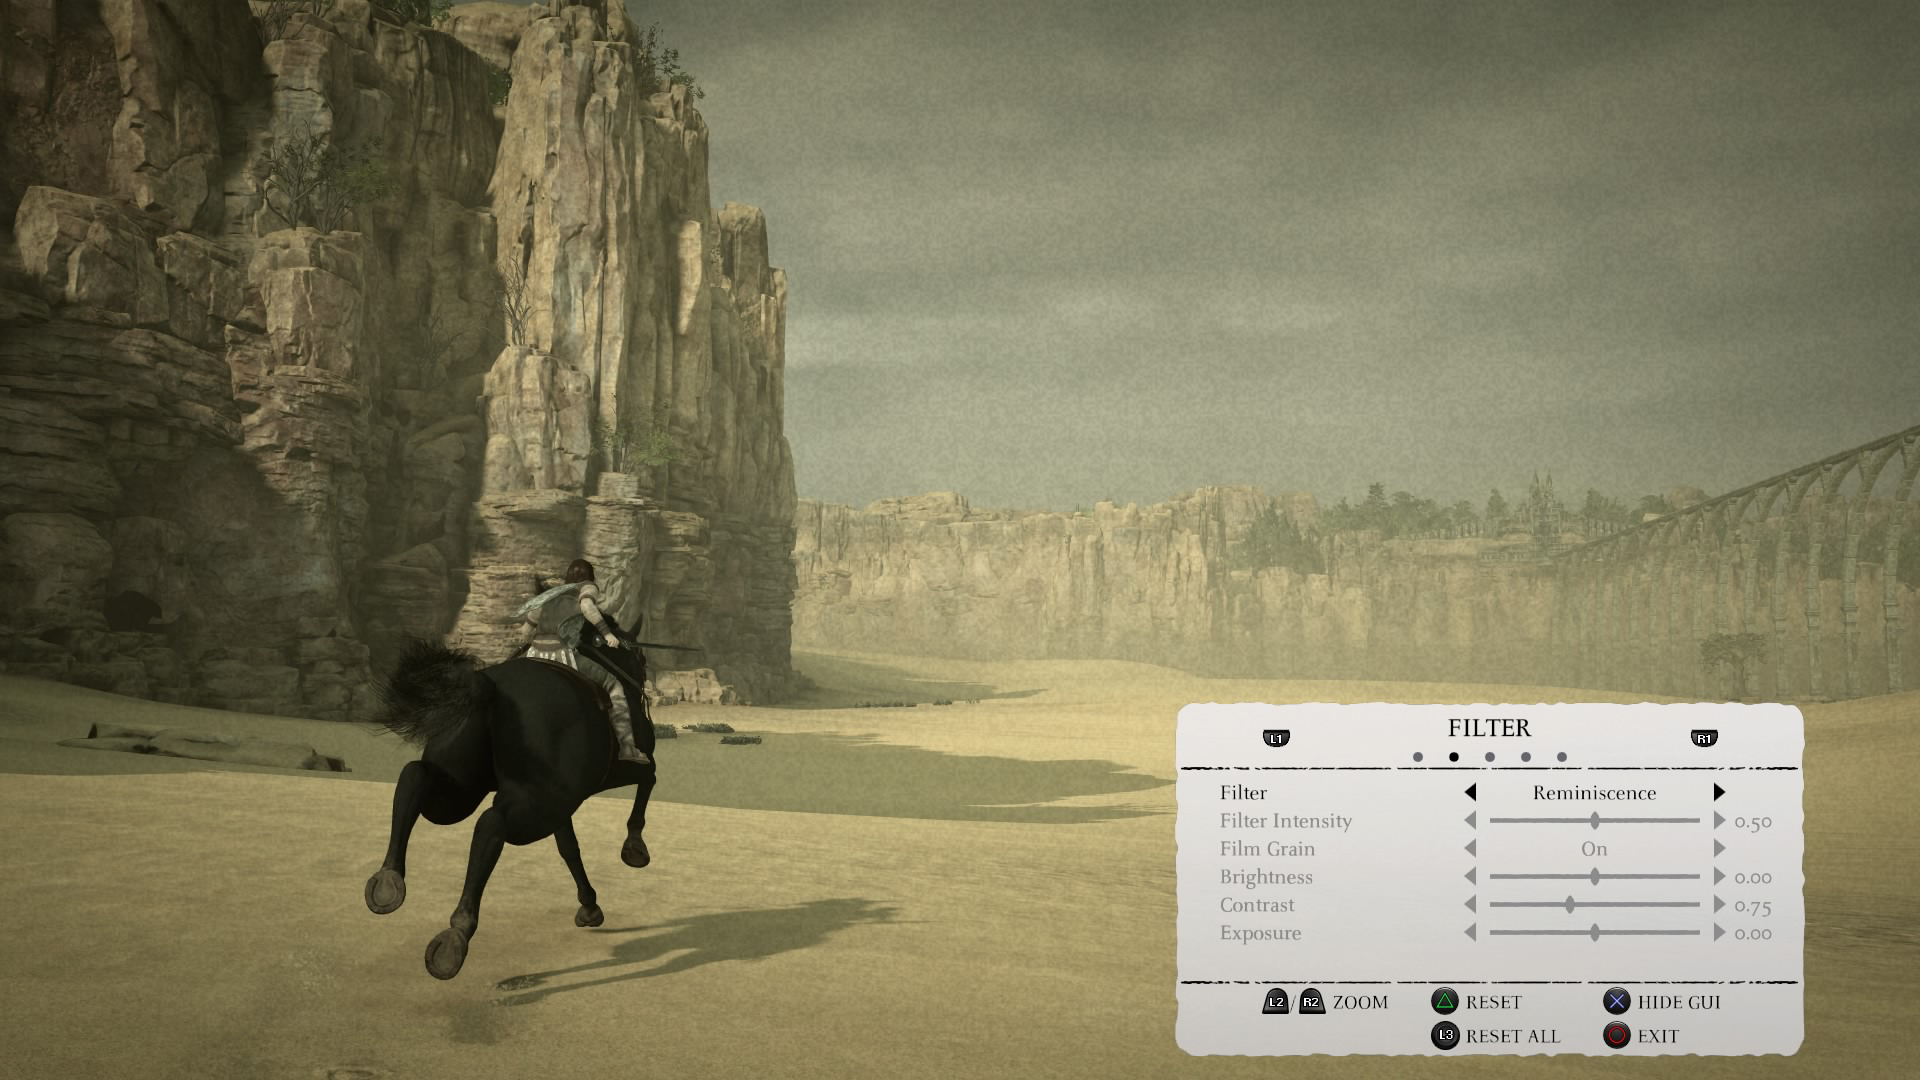 Shadow of the Colossus Remake (Reprise): Reminiscence and